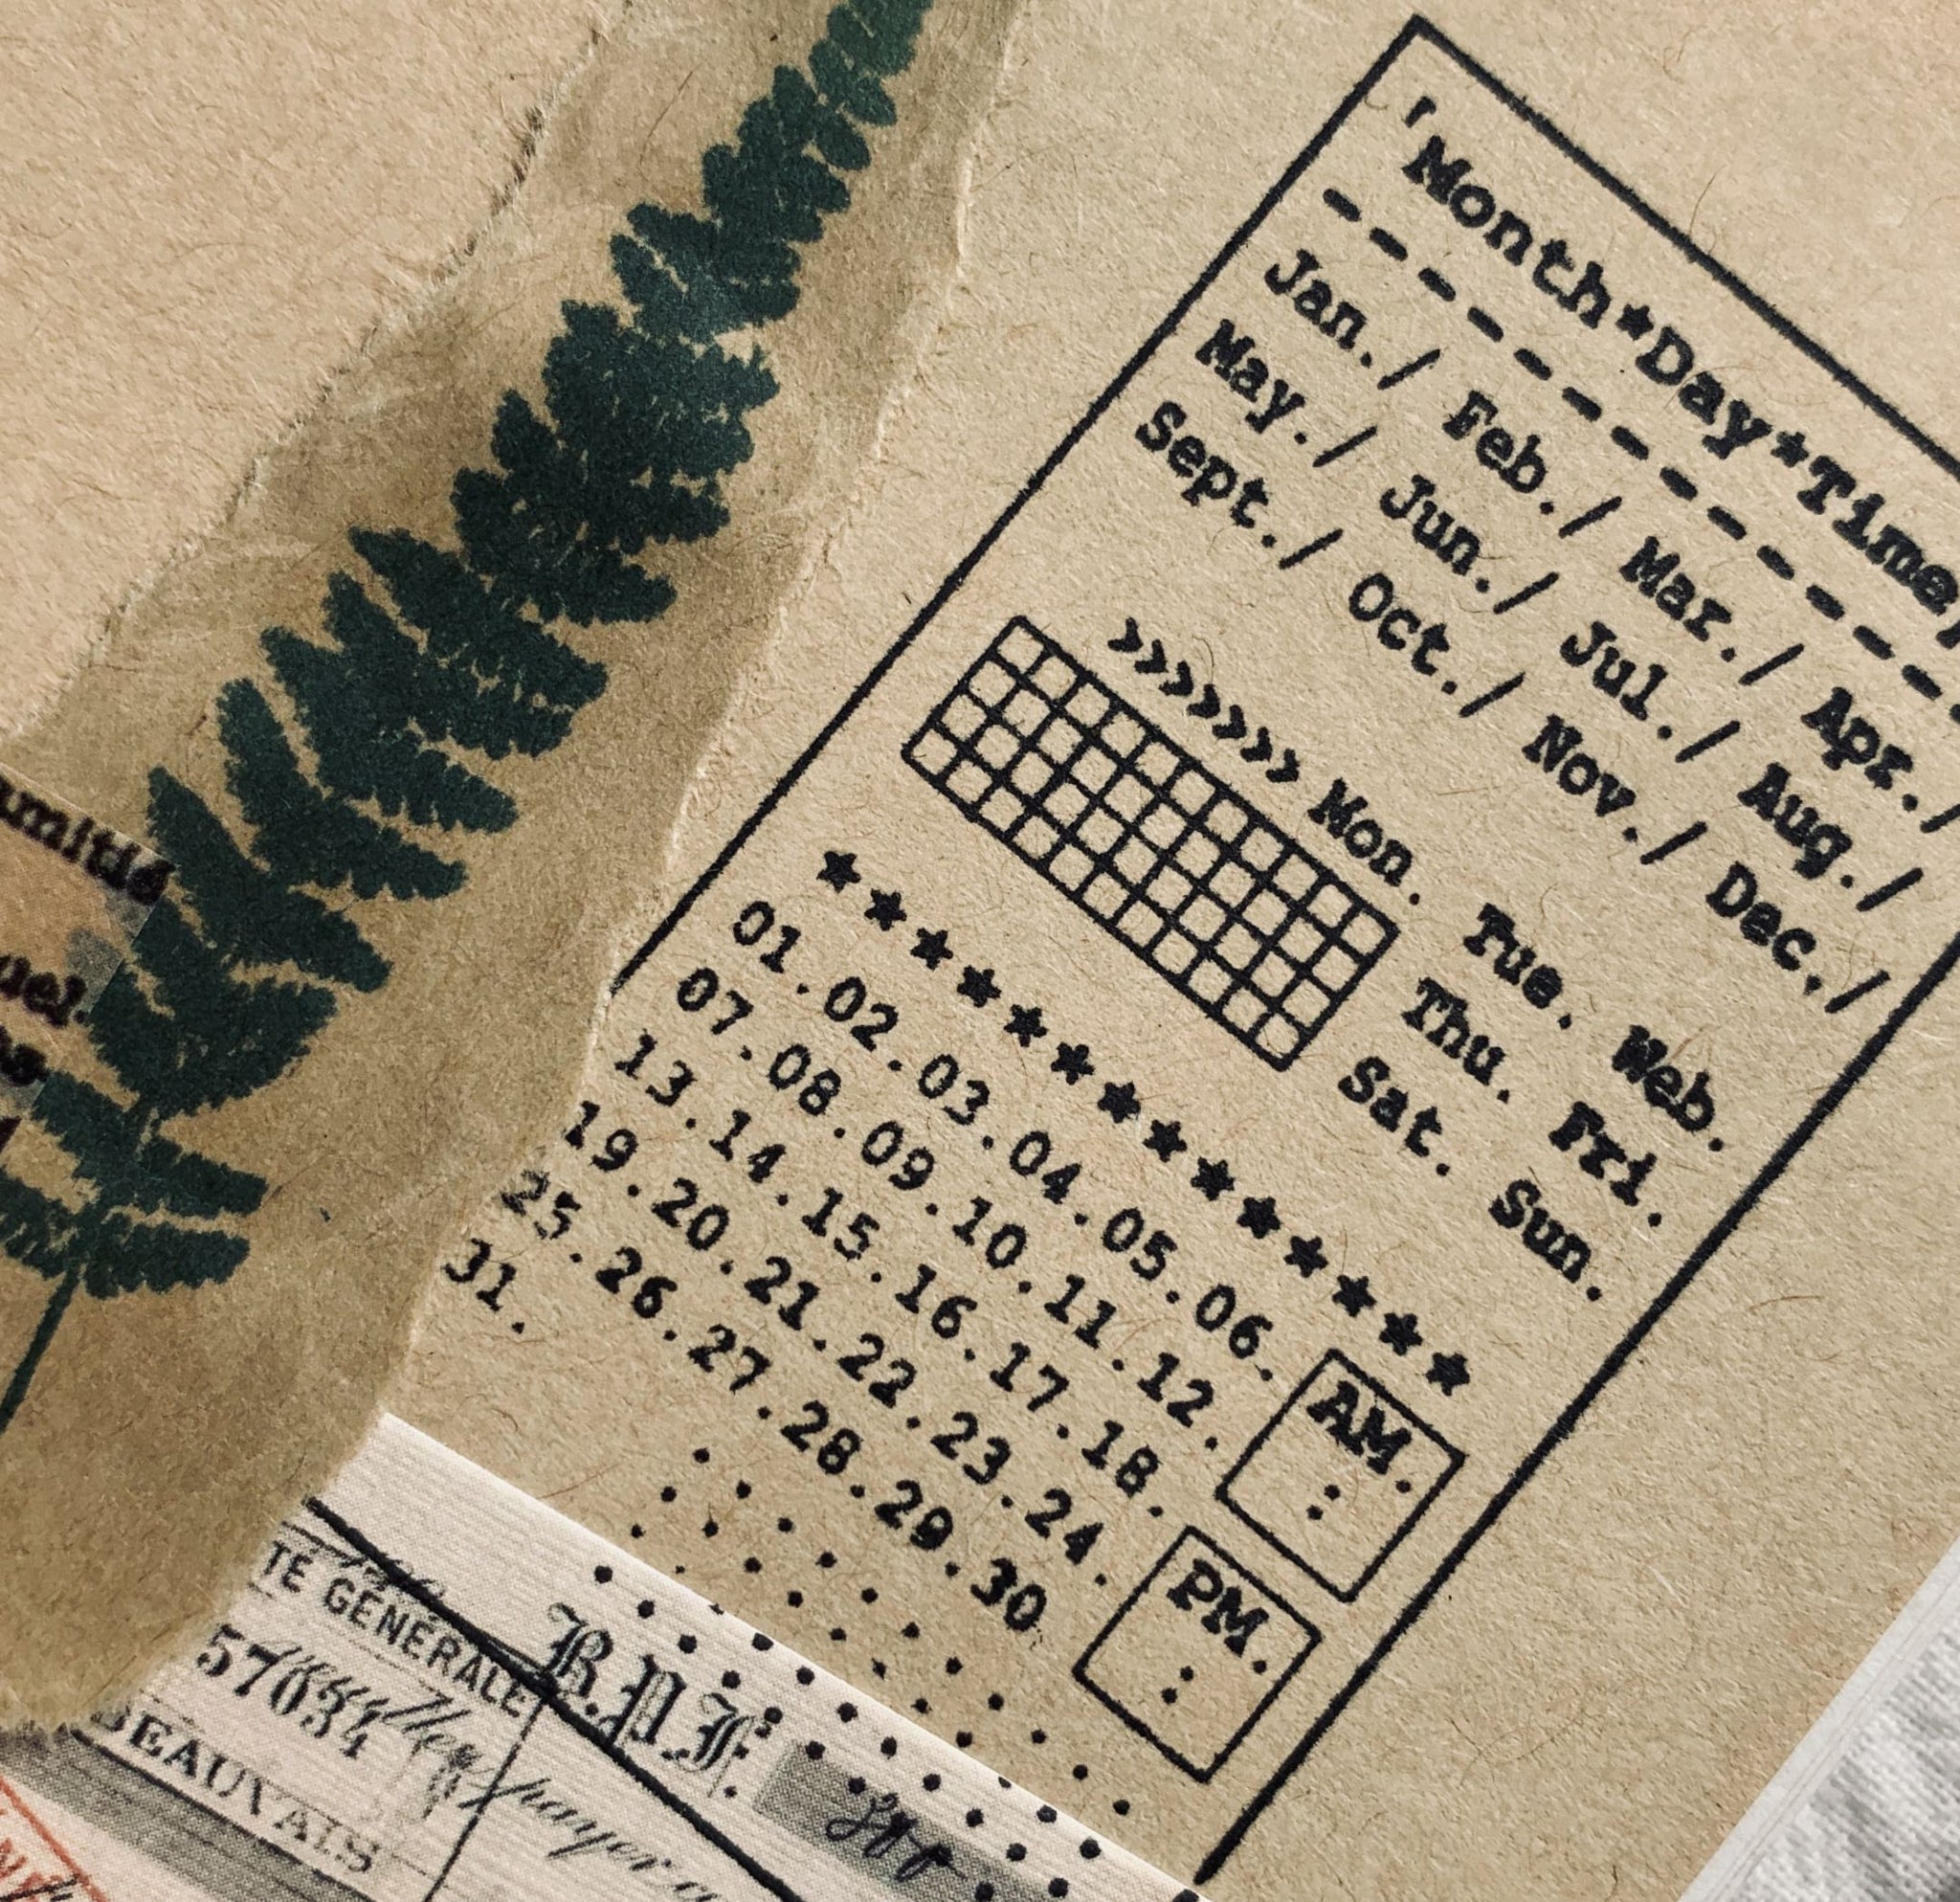 Date and Time Tracker Wooden Stamp